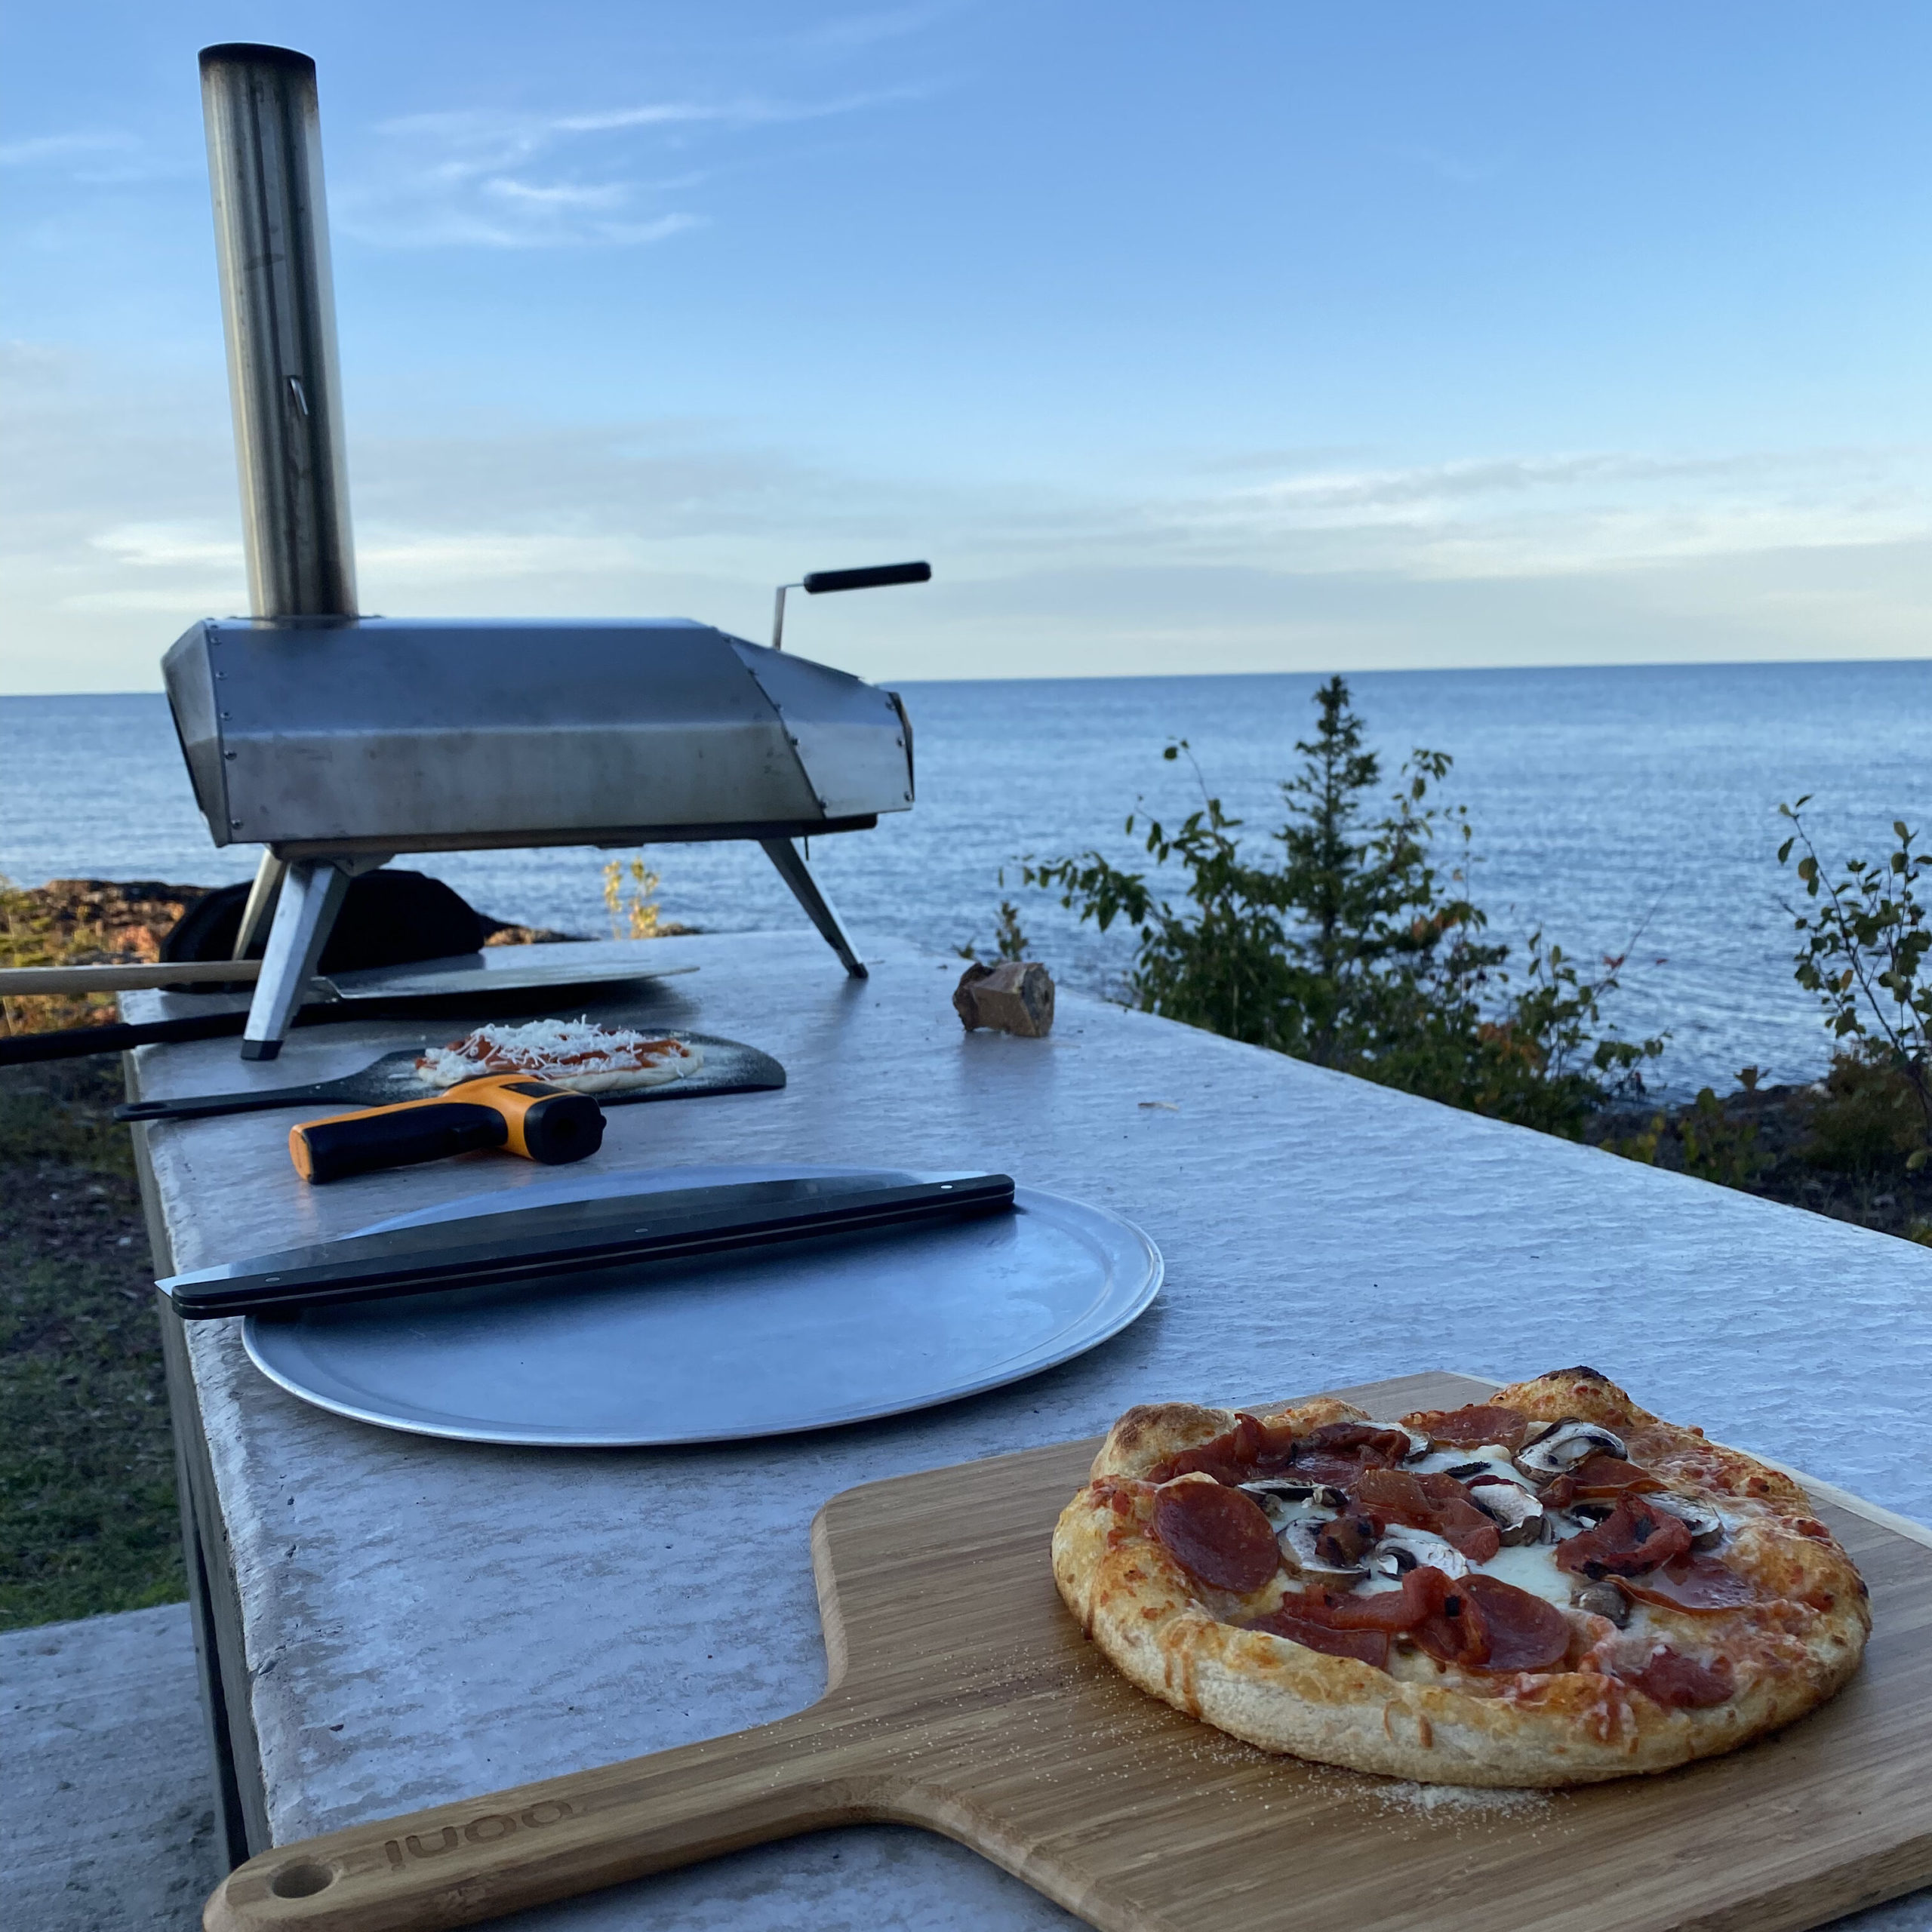 The Ooni Karu wood-fired pizza oven cooks delicious pizza for guests at Fresh Coast Cabins on Friday nights. 